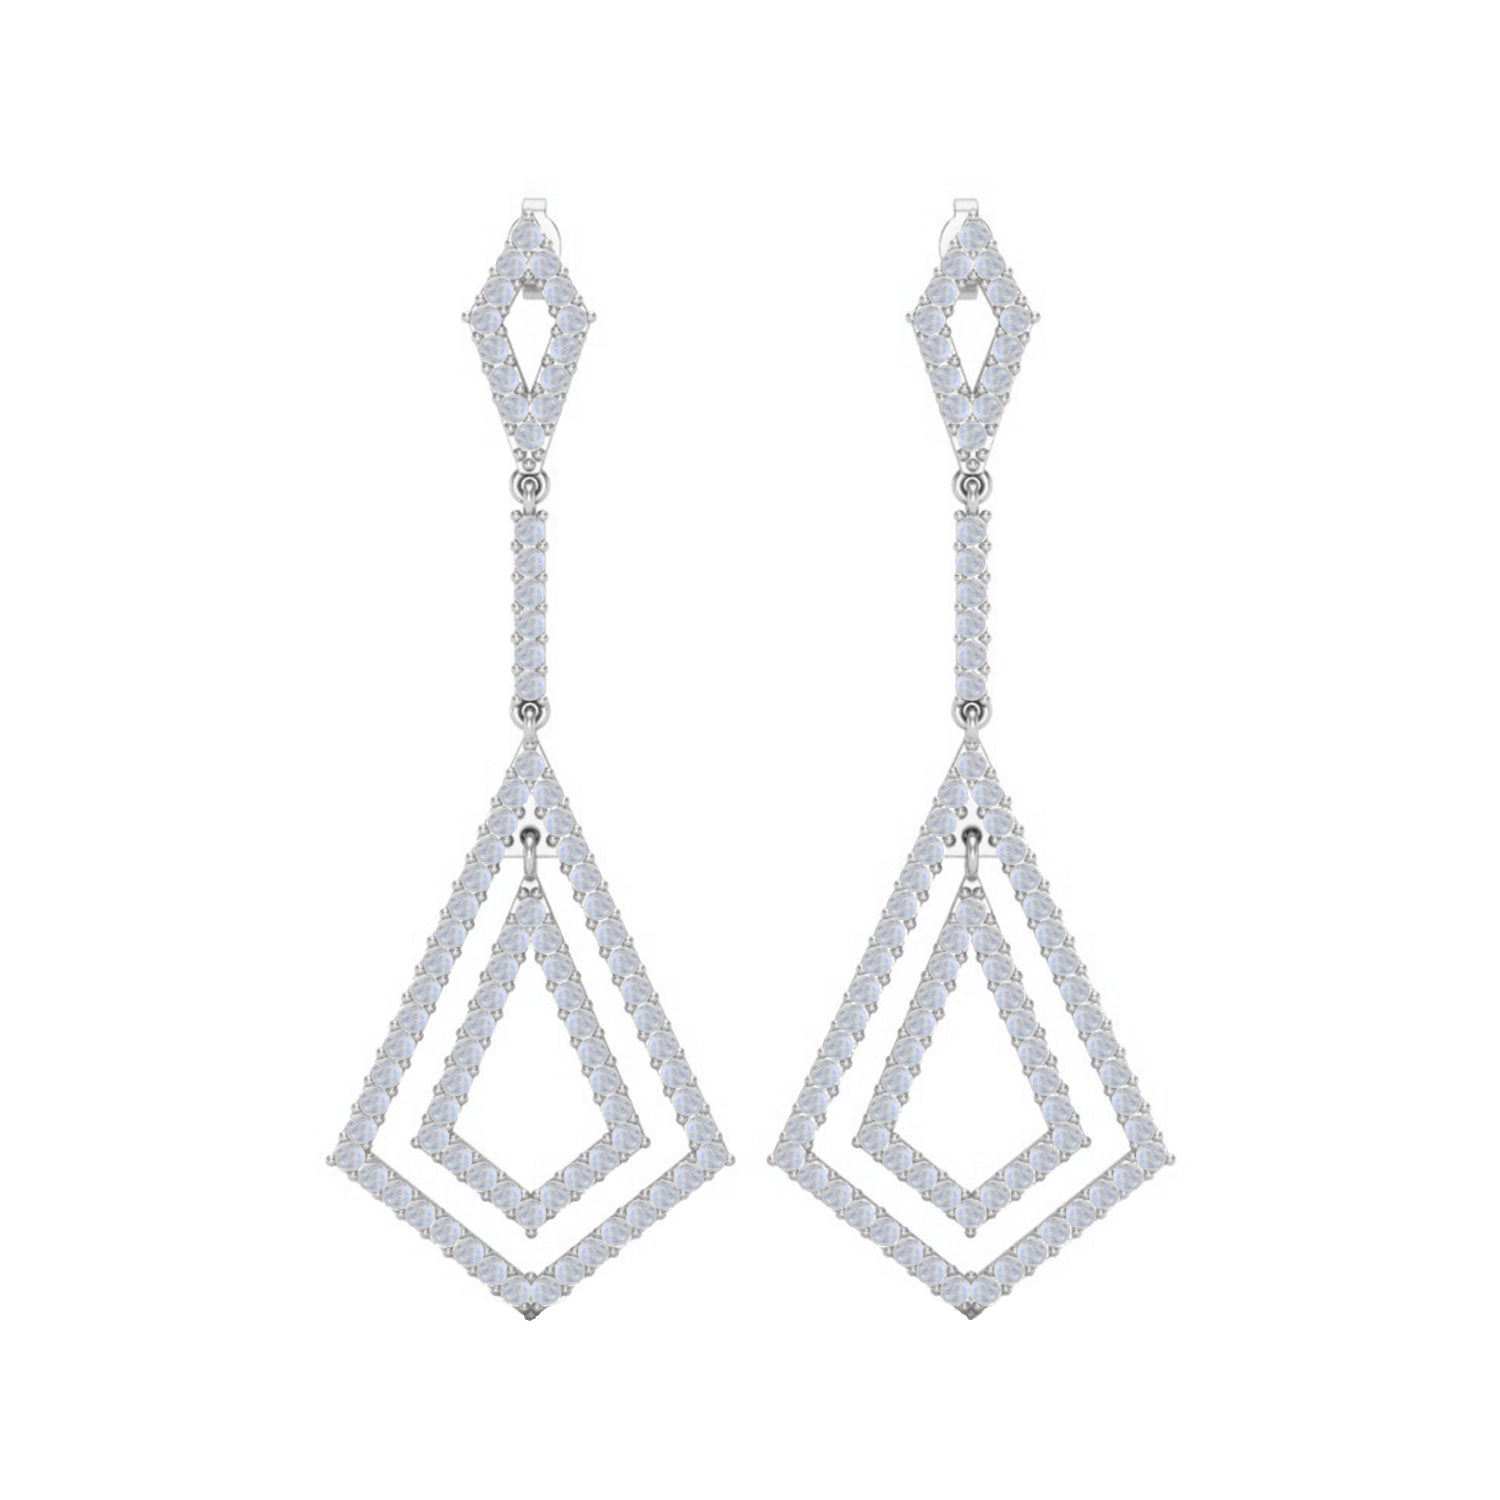 Chandelier Earrings Are The Weighty '90s Trend Swinging Back Around